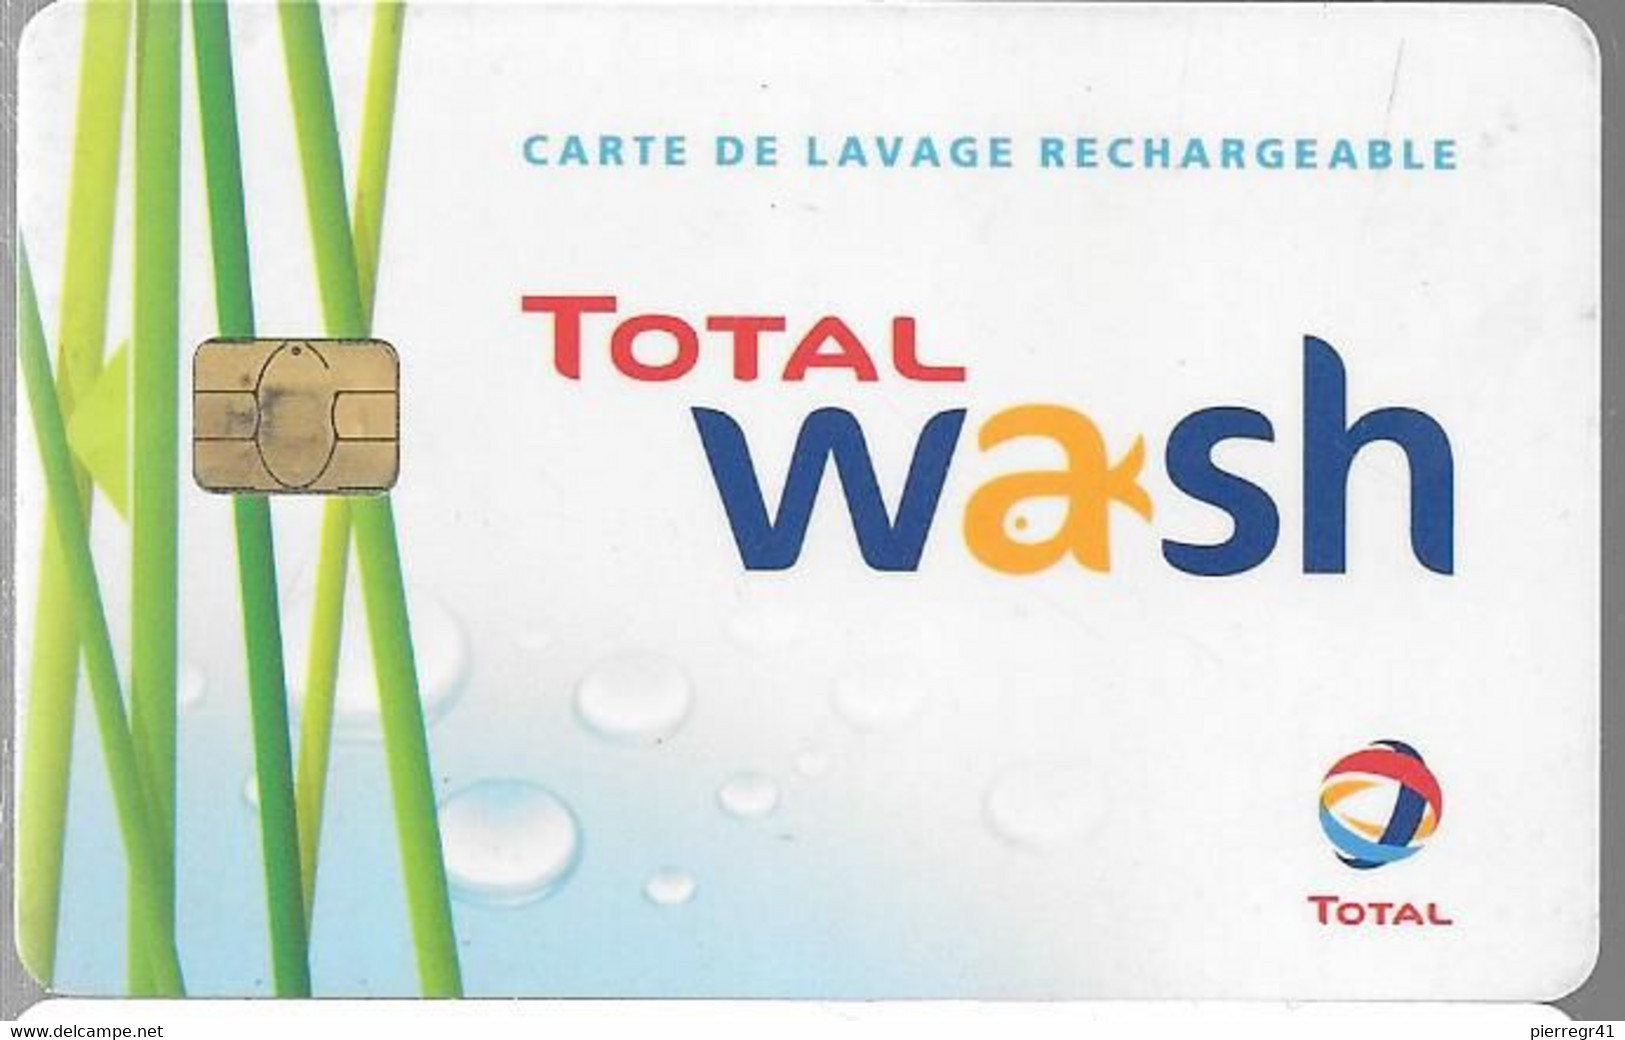 CARTE-PUCE-RECHARGEABLE-LAVAGE-TOTAL WASH-TBE - Lavage Auto